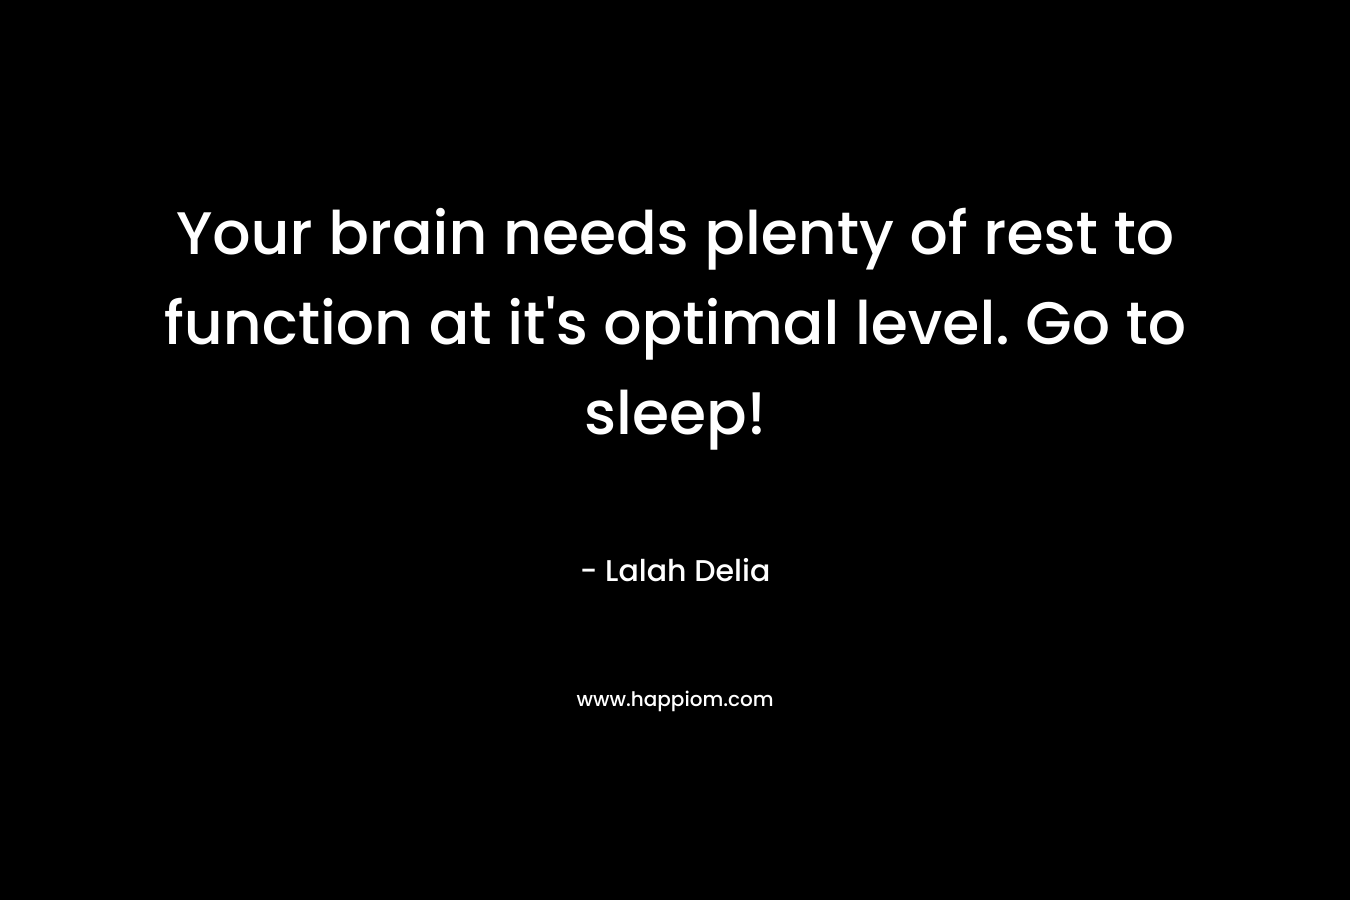 Your brain needs plenty of rest to function at it's optimal level. Go to sleep!